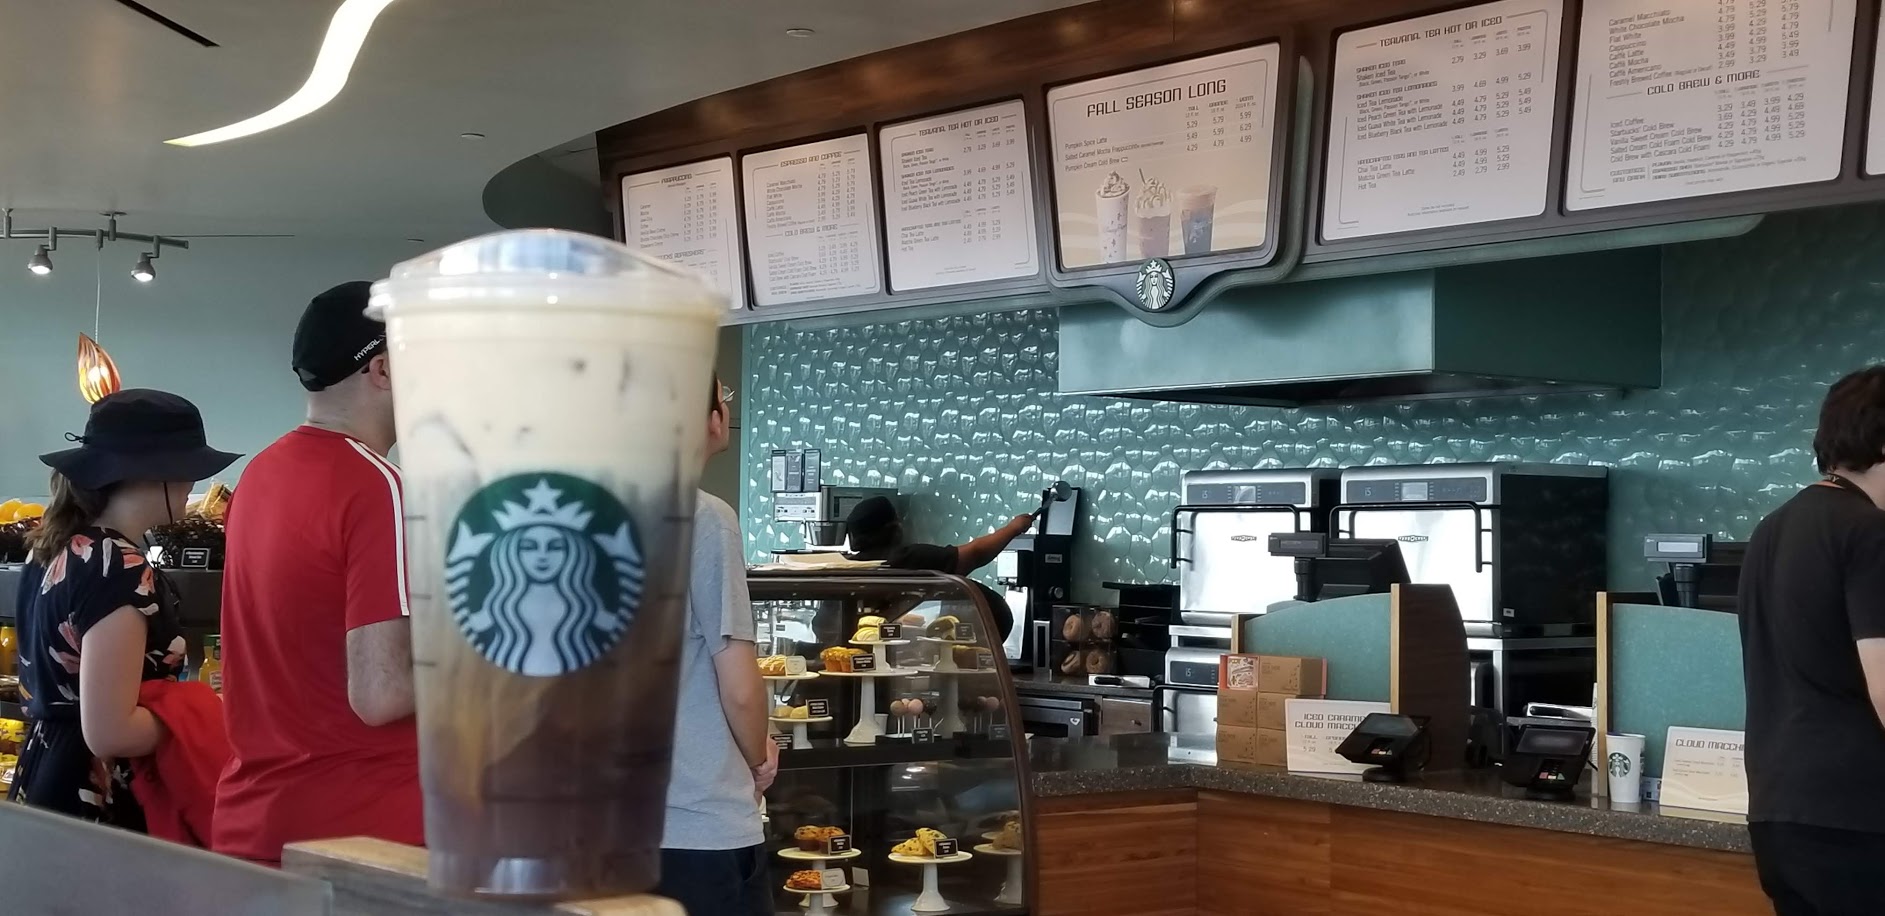 Fountain View Starbucks in Epcot is Closing Today